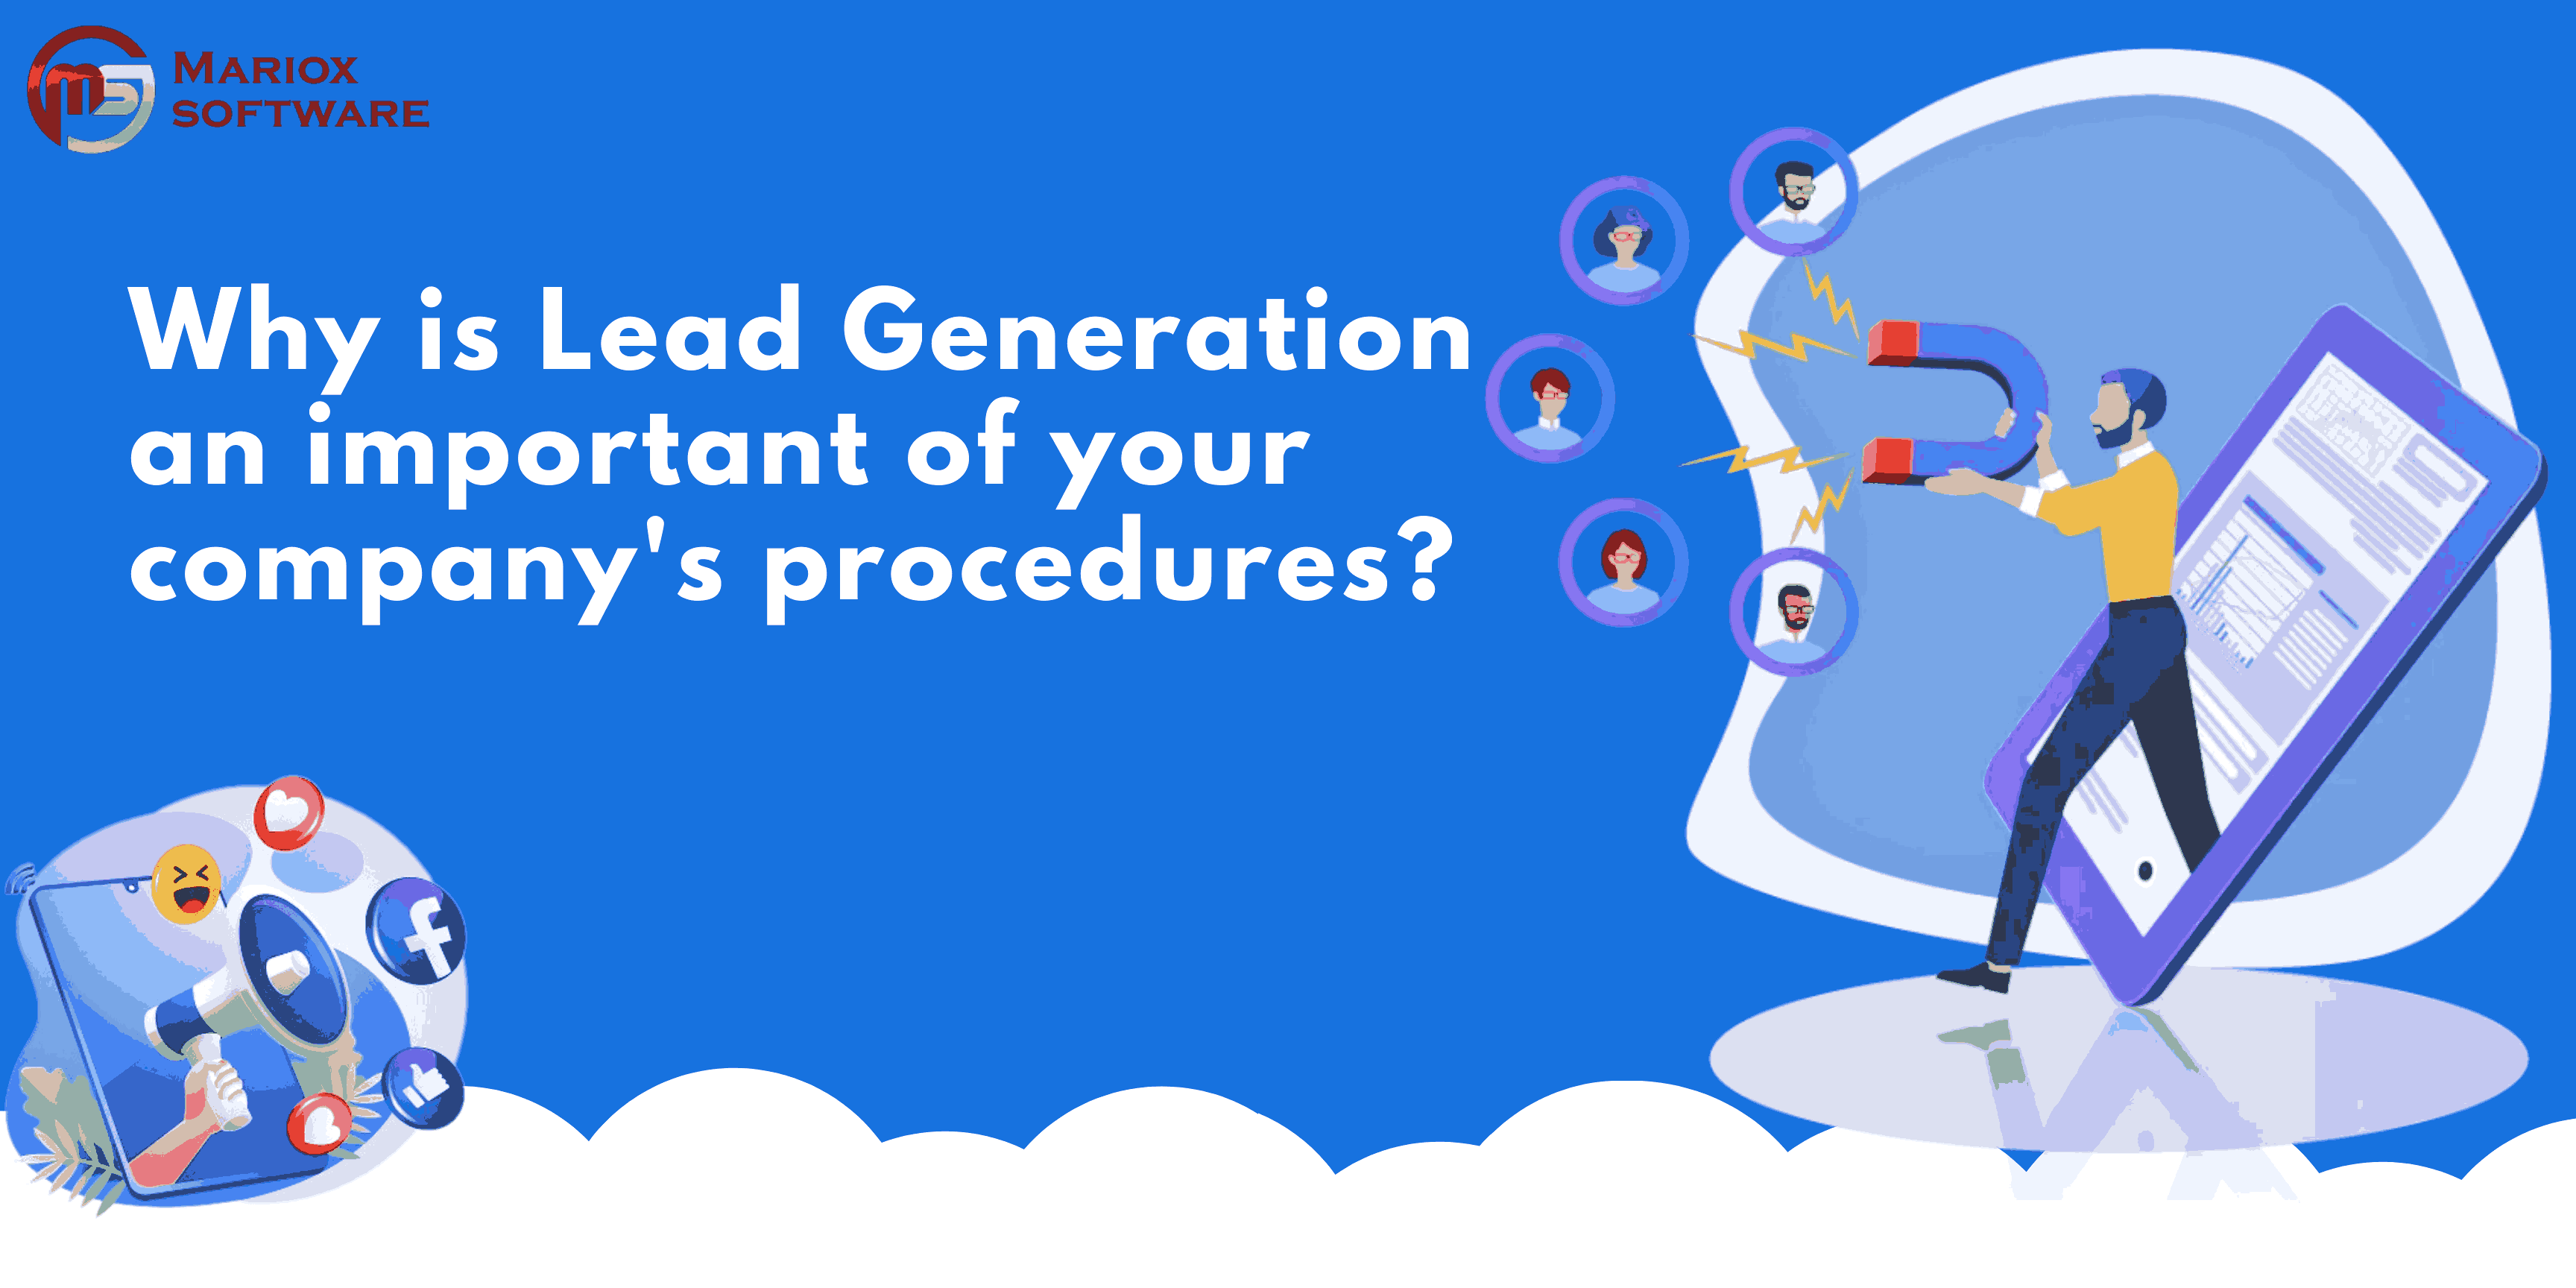 Why is lead generation an important part of your company’s procedures?